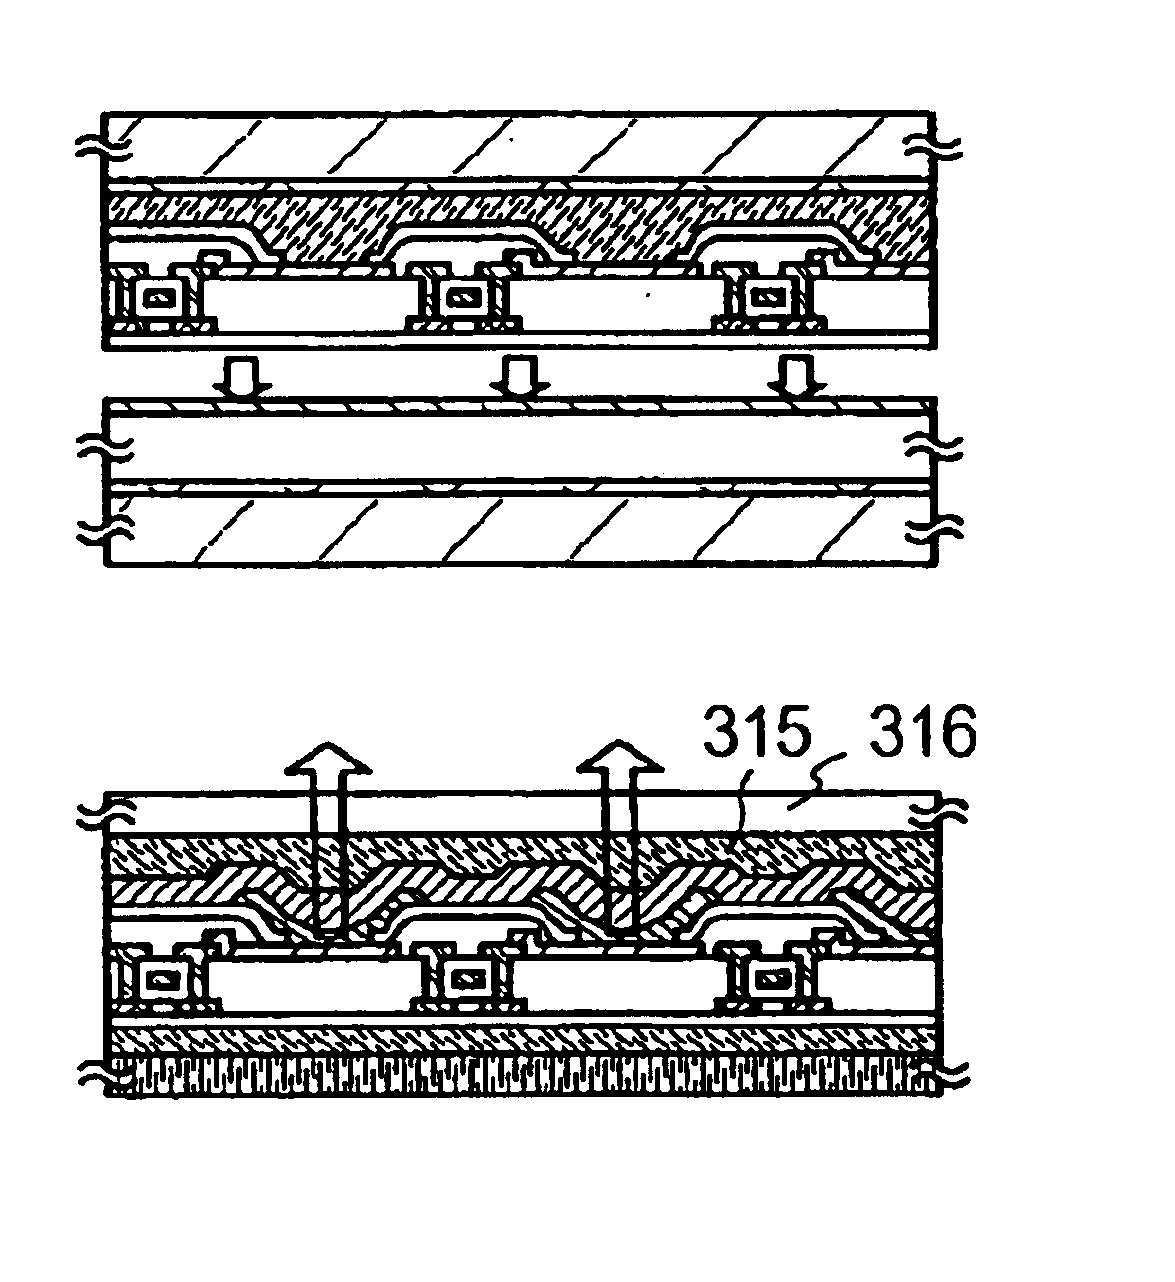 Semiconductor apparatus and fabrication method of the same